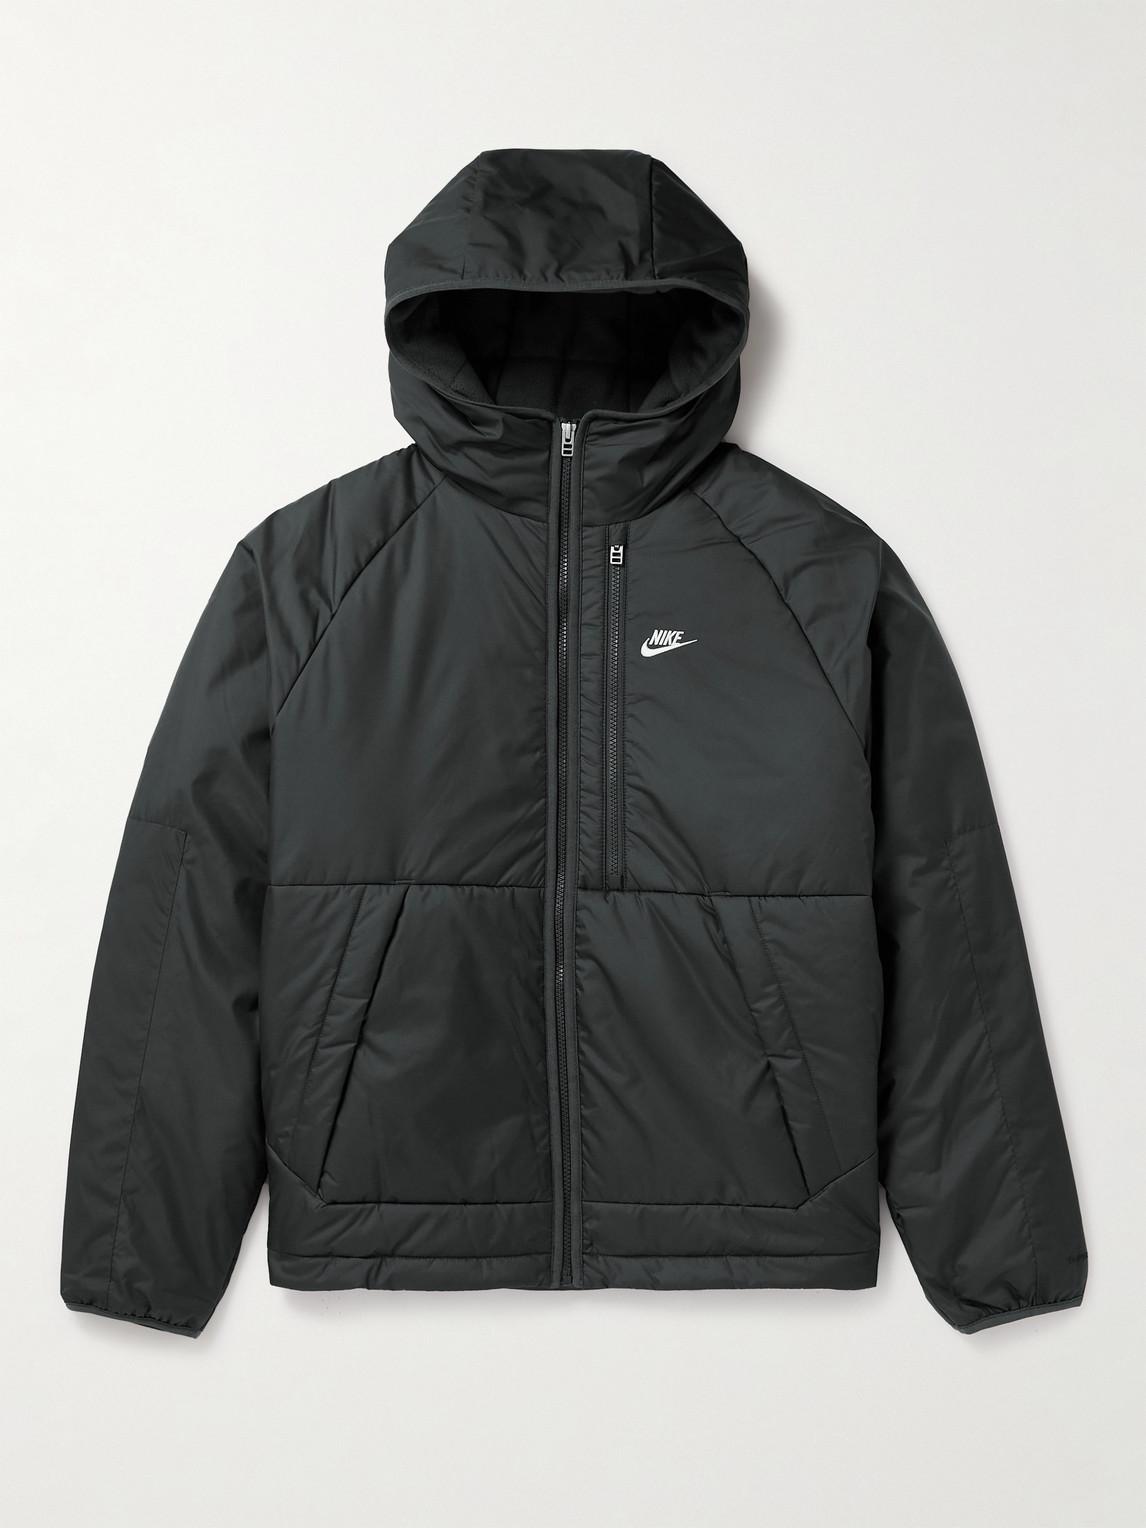 Nike Therma-fit Repel Shell Jacket in Black for Men